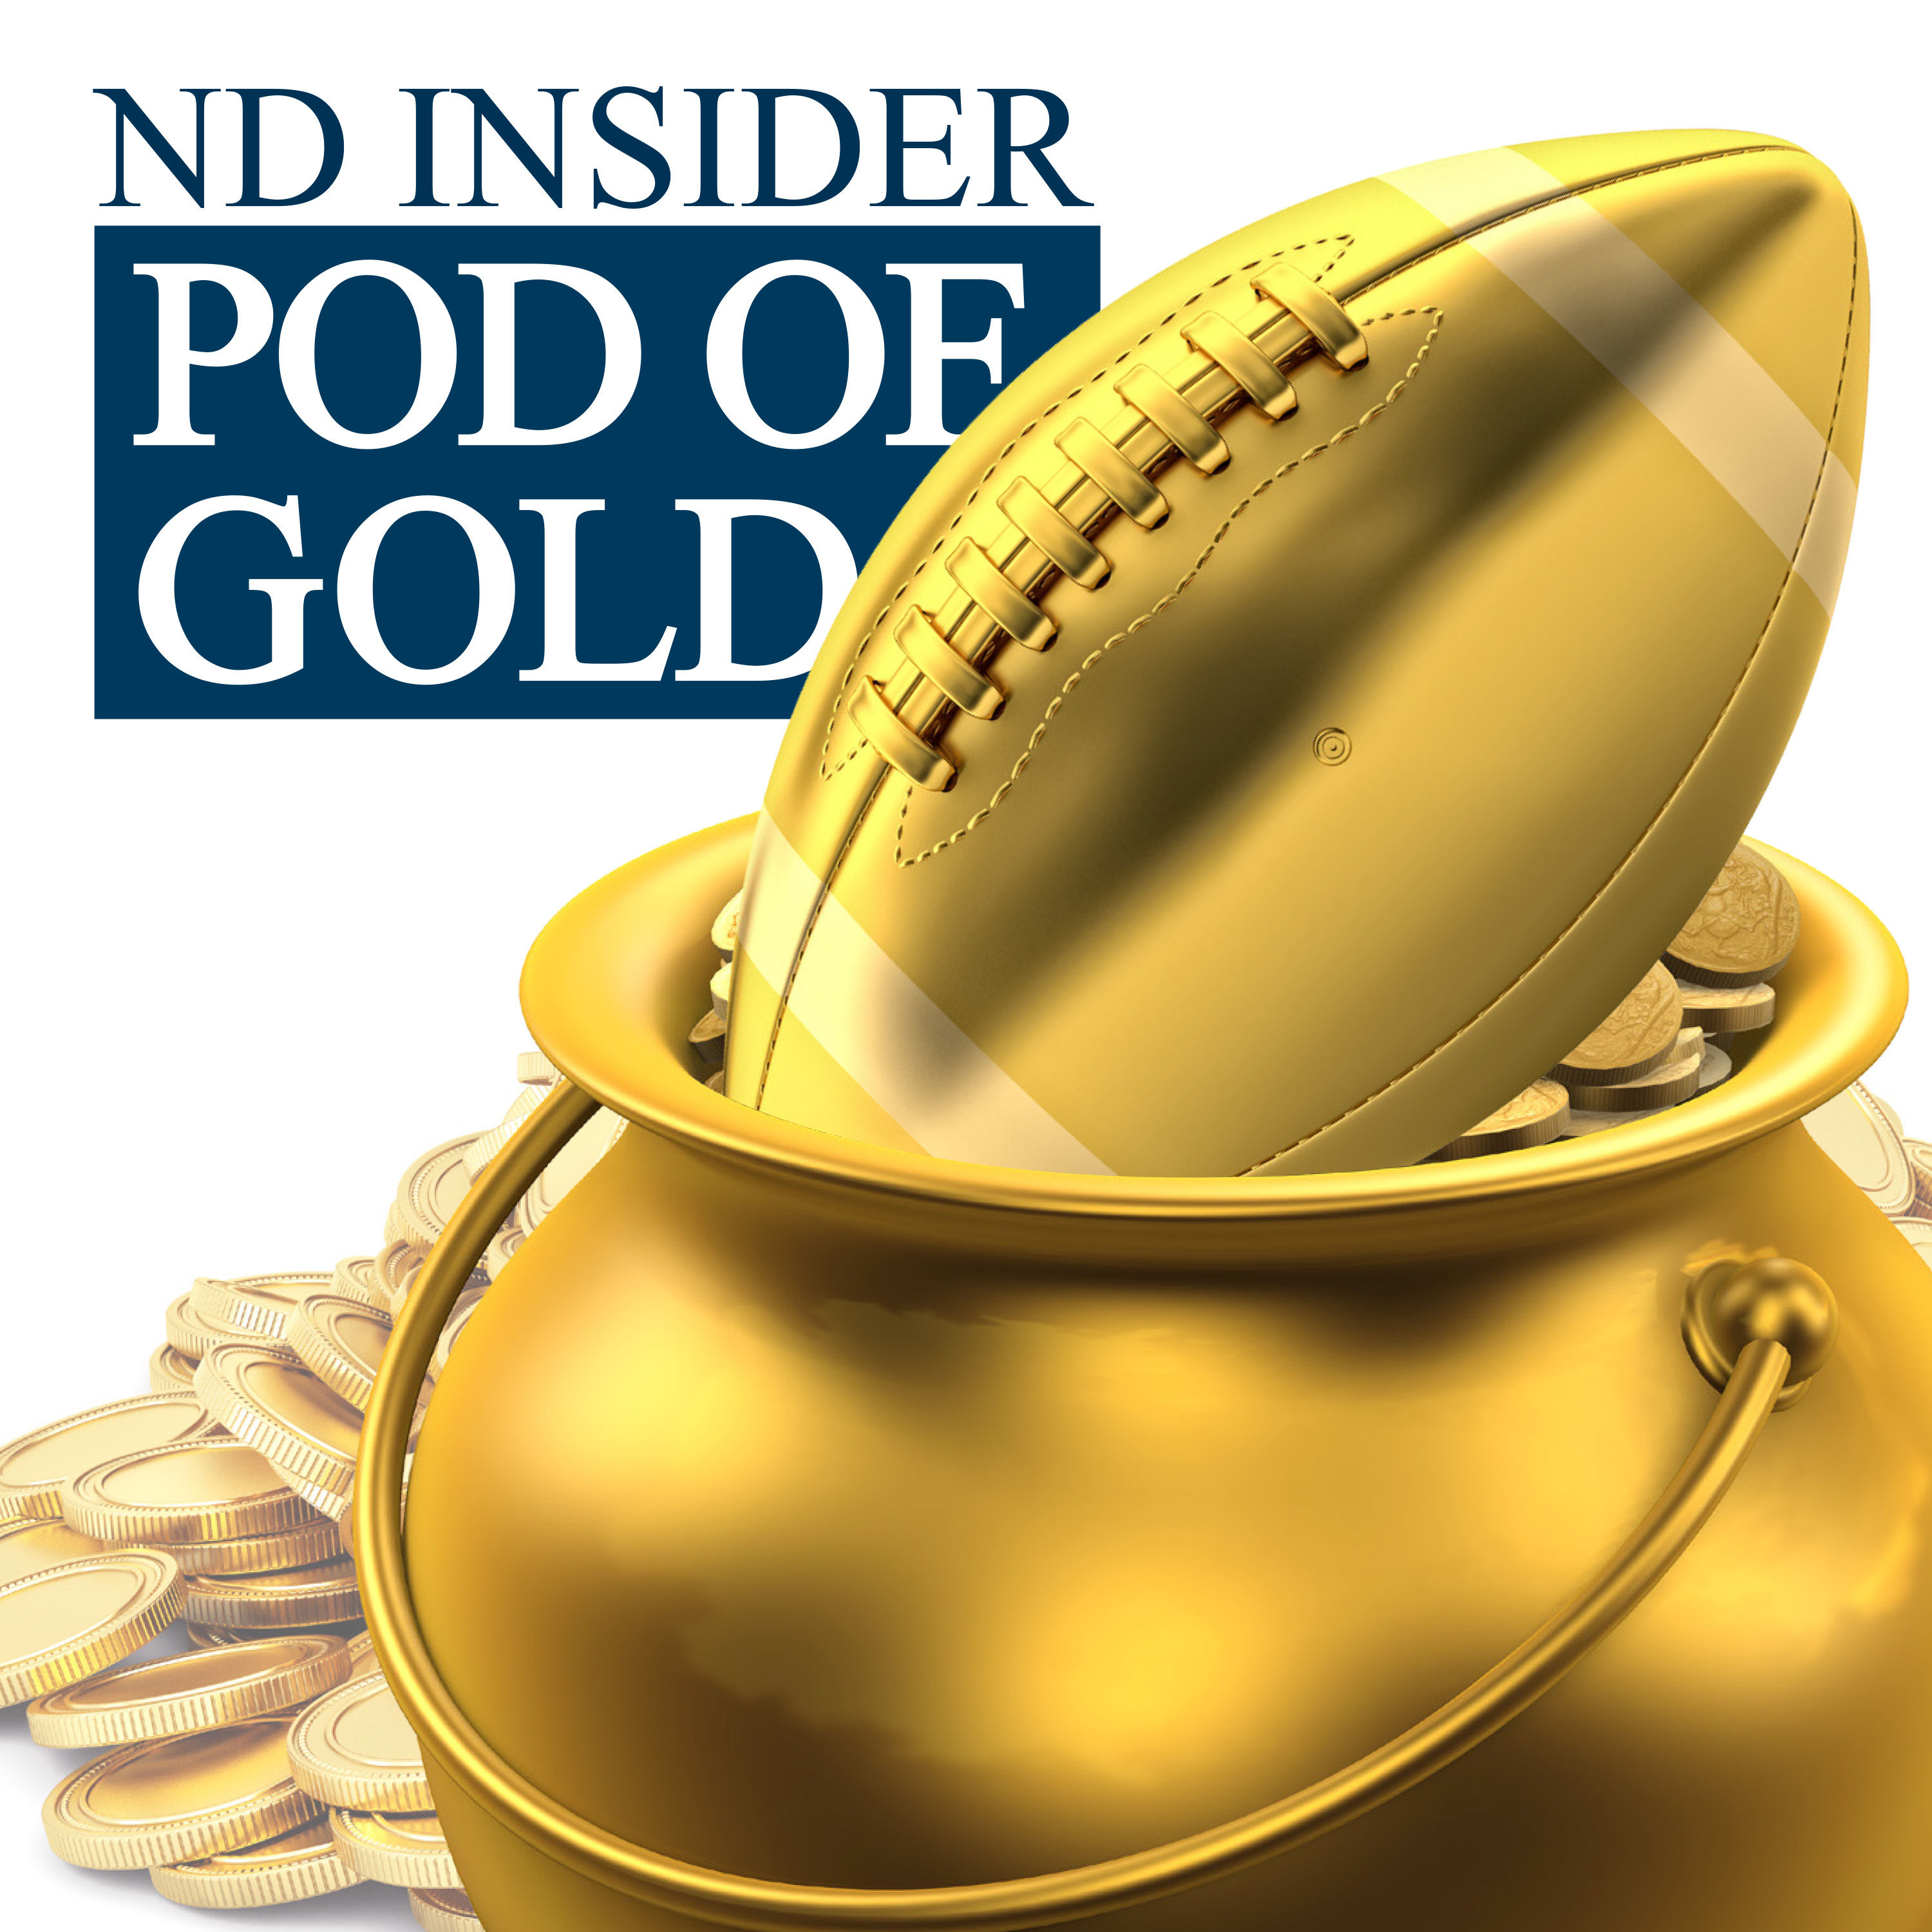 ACC Network analyst Eric Mac Lain joins Pod of Gold to talk Notre Dame vs. Clemson at Death Valley